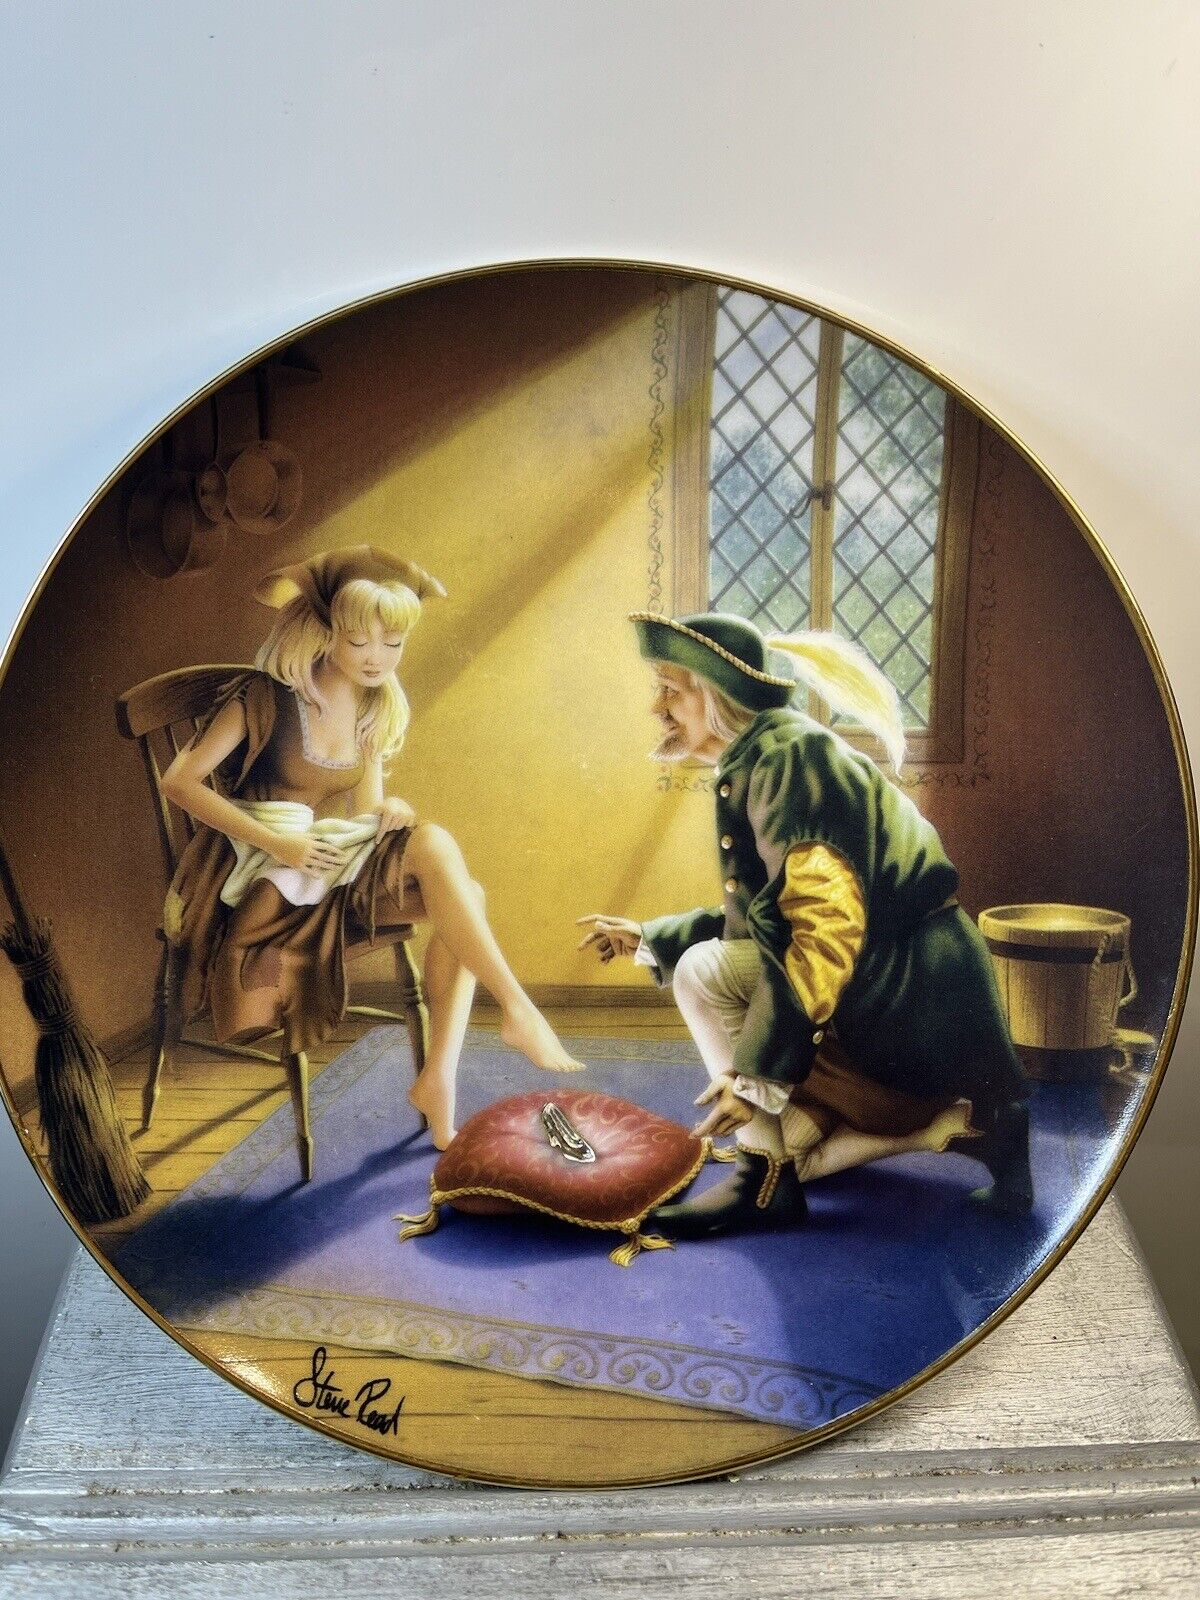 Cinderella \'if the shoe fits\' by Steve Reed Limited Edition Franklin Mint Plate